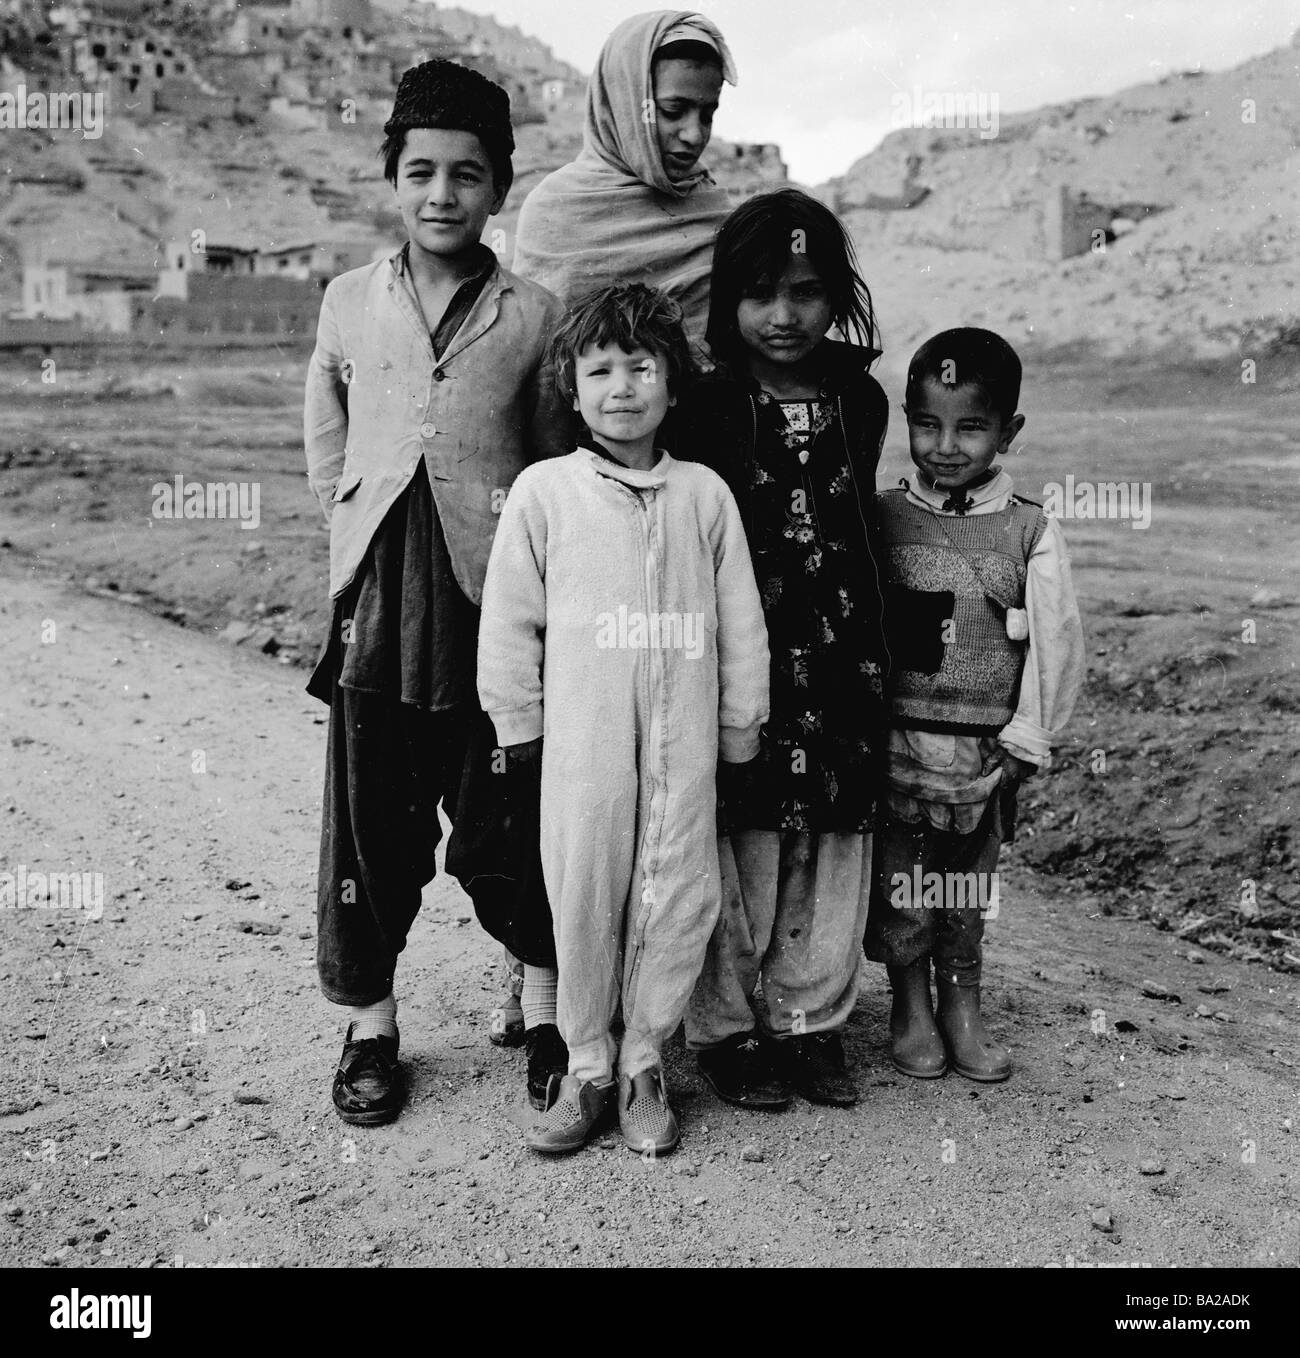 1950s, a photo by J Allan Cash of a mother with her four children, wearing traditional Afghan clothing, on a hillside path near Kabul, Afghanistan. Stock Photo